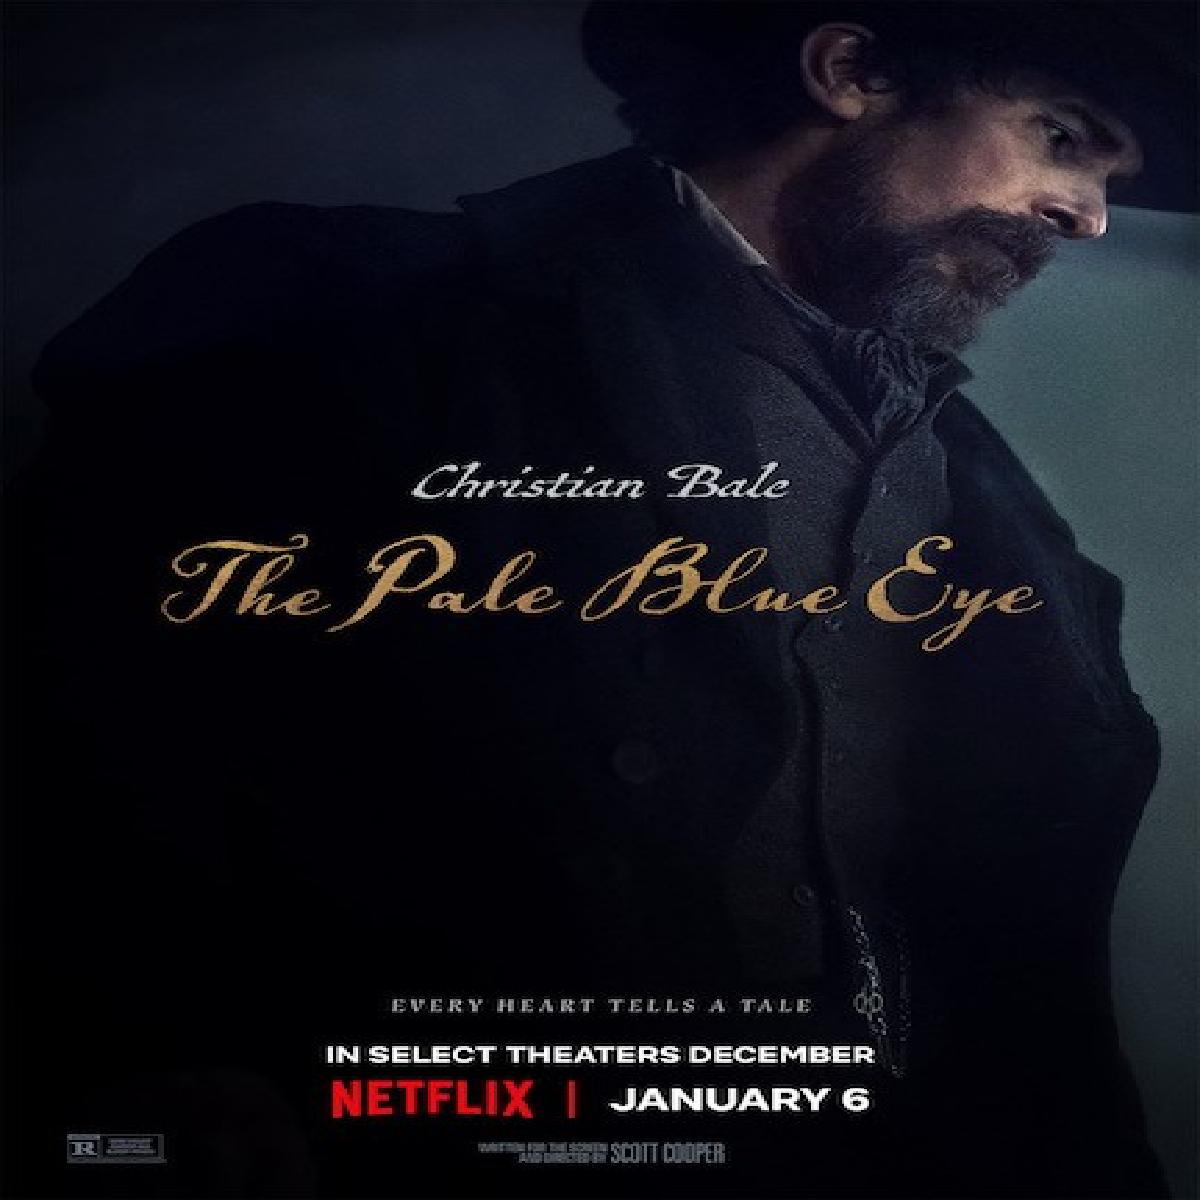 The Pale Blue Eye Trailer Is Out, Starring Christian Bale